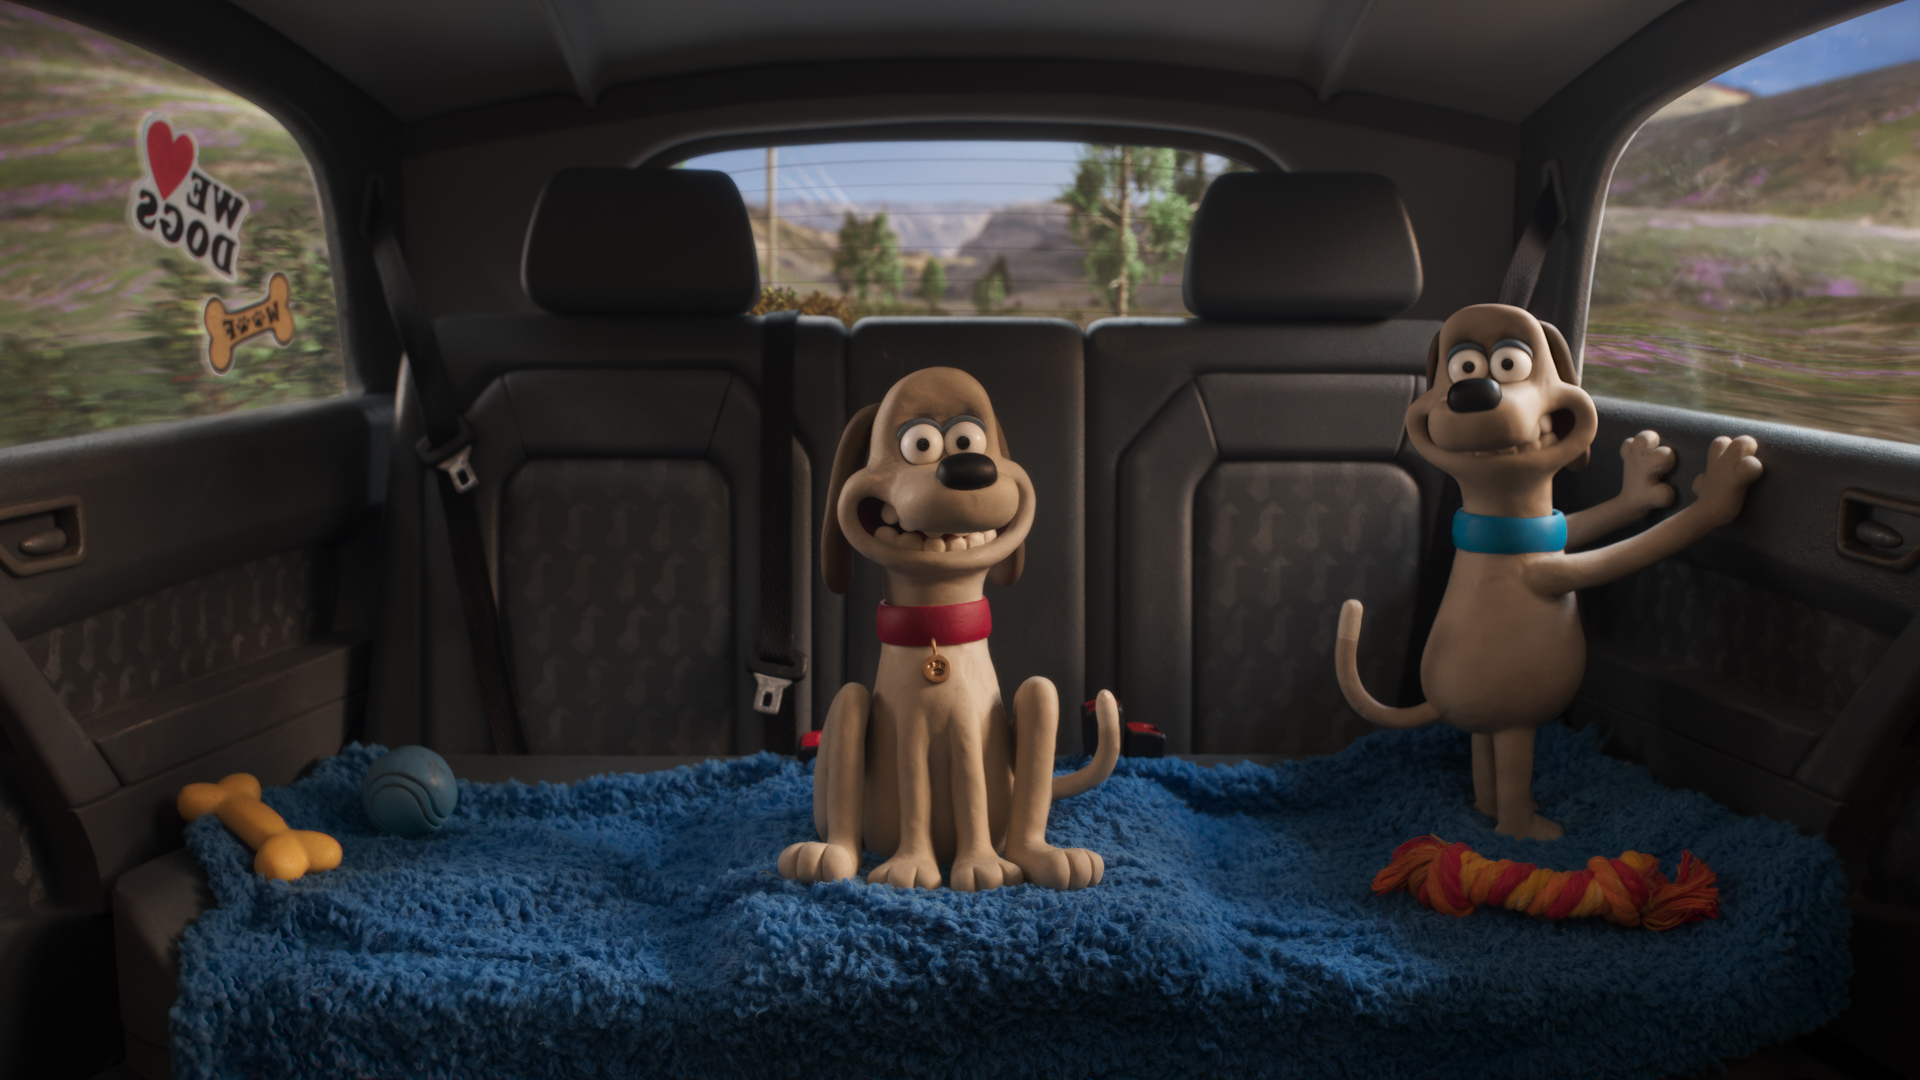 PUBLIC TO STAR IN AARDMAN SHORTS ON THE BBC